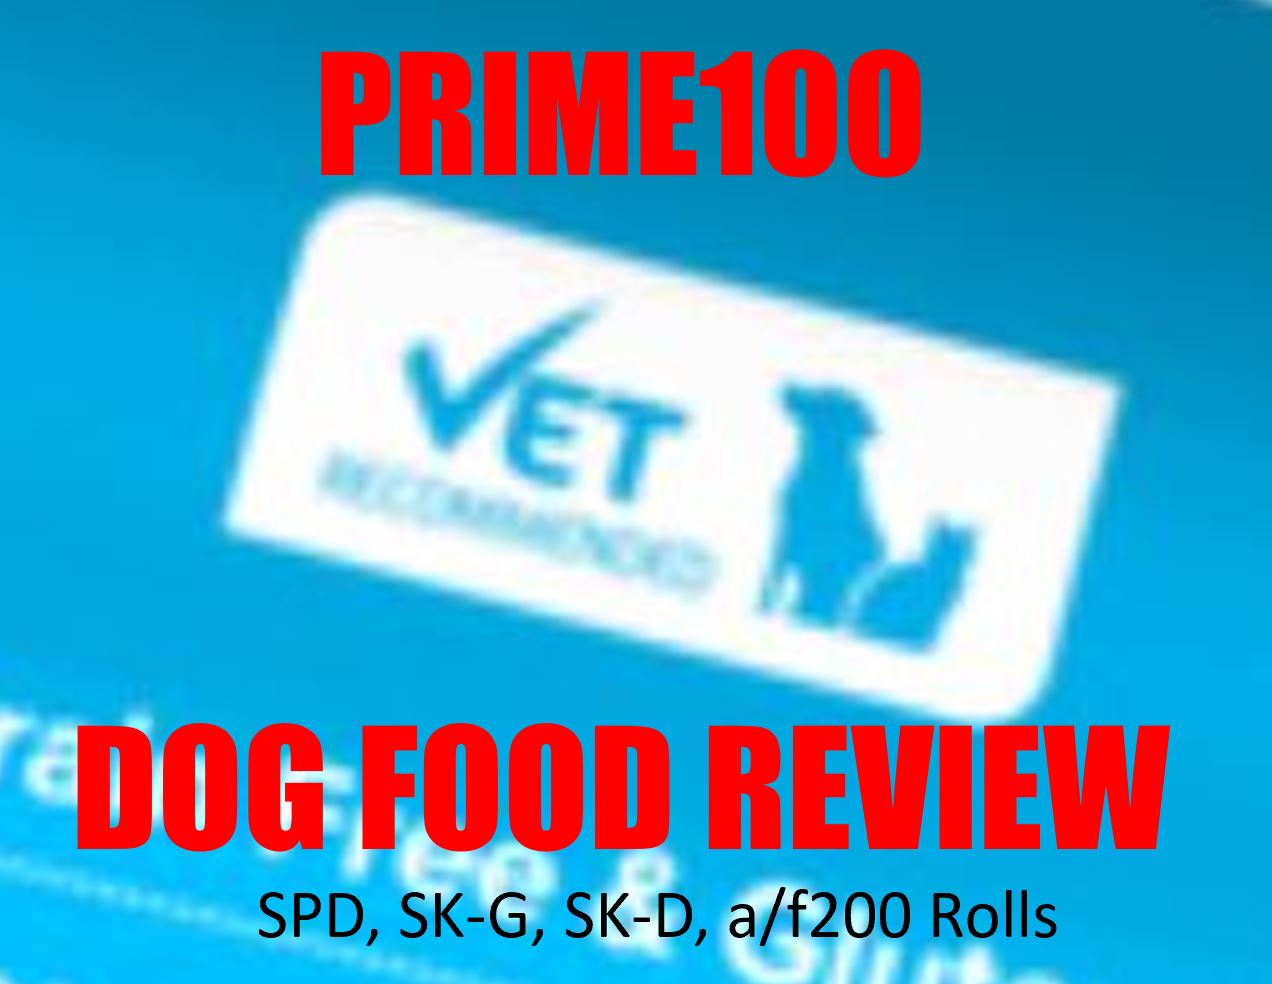 Prime100 Dog Food Review